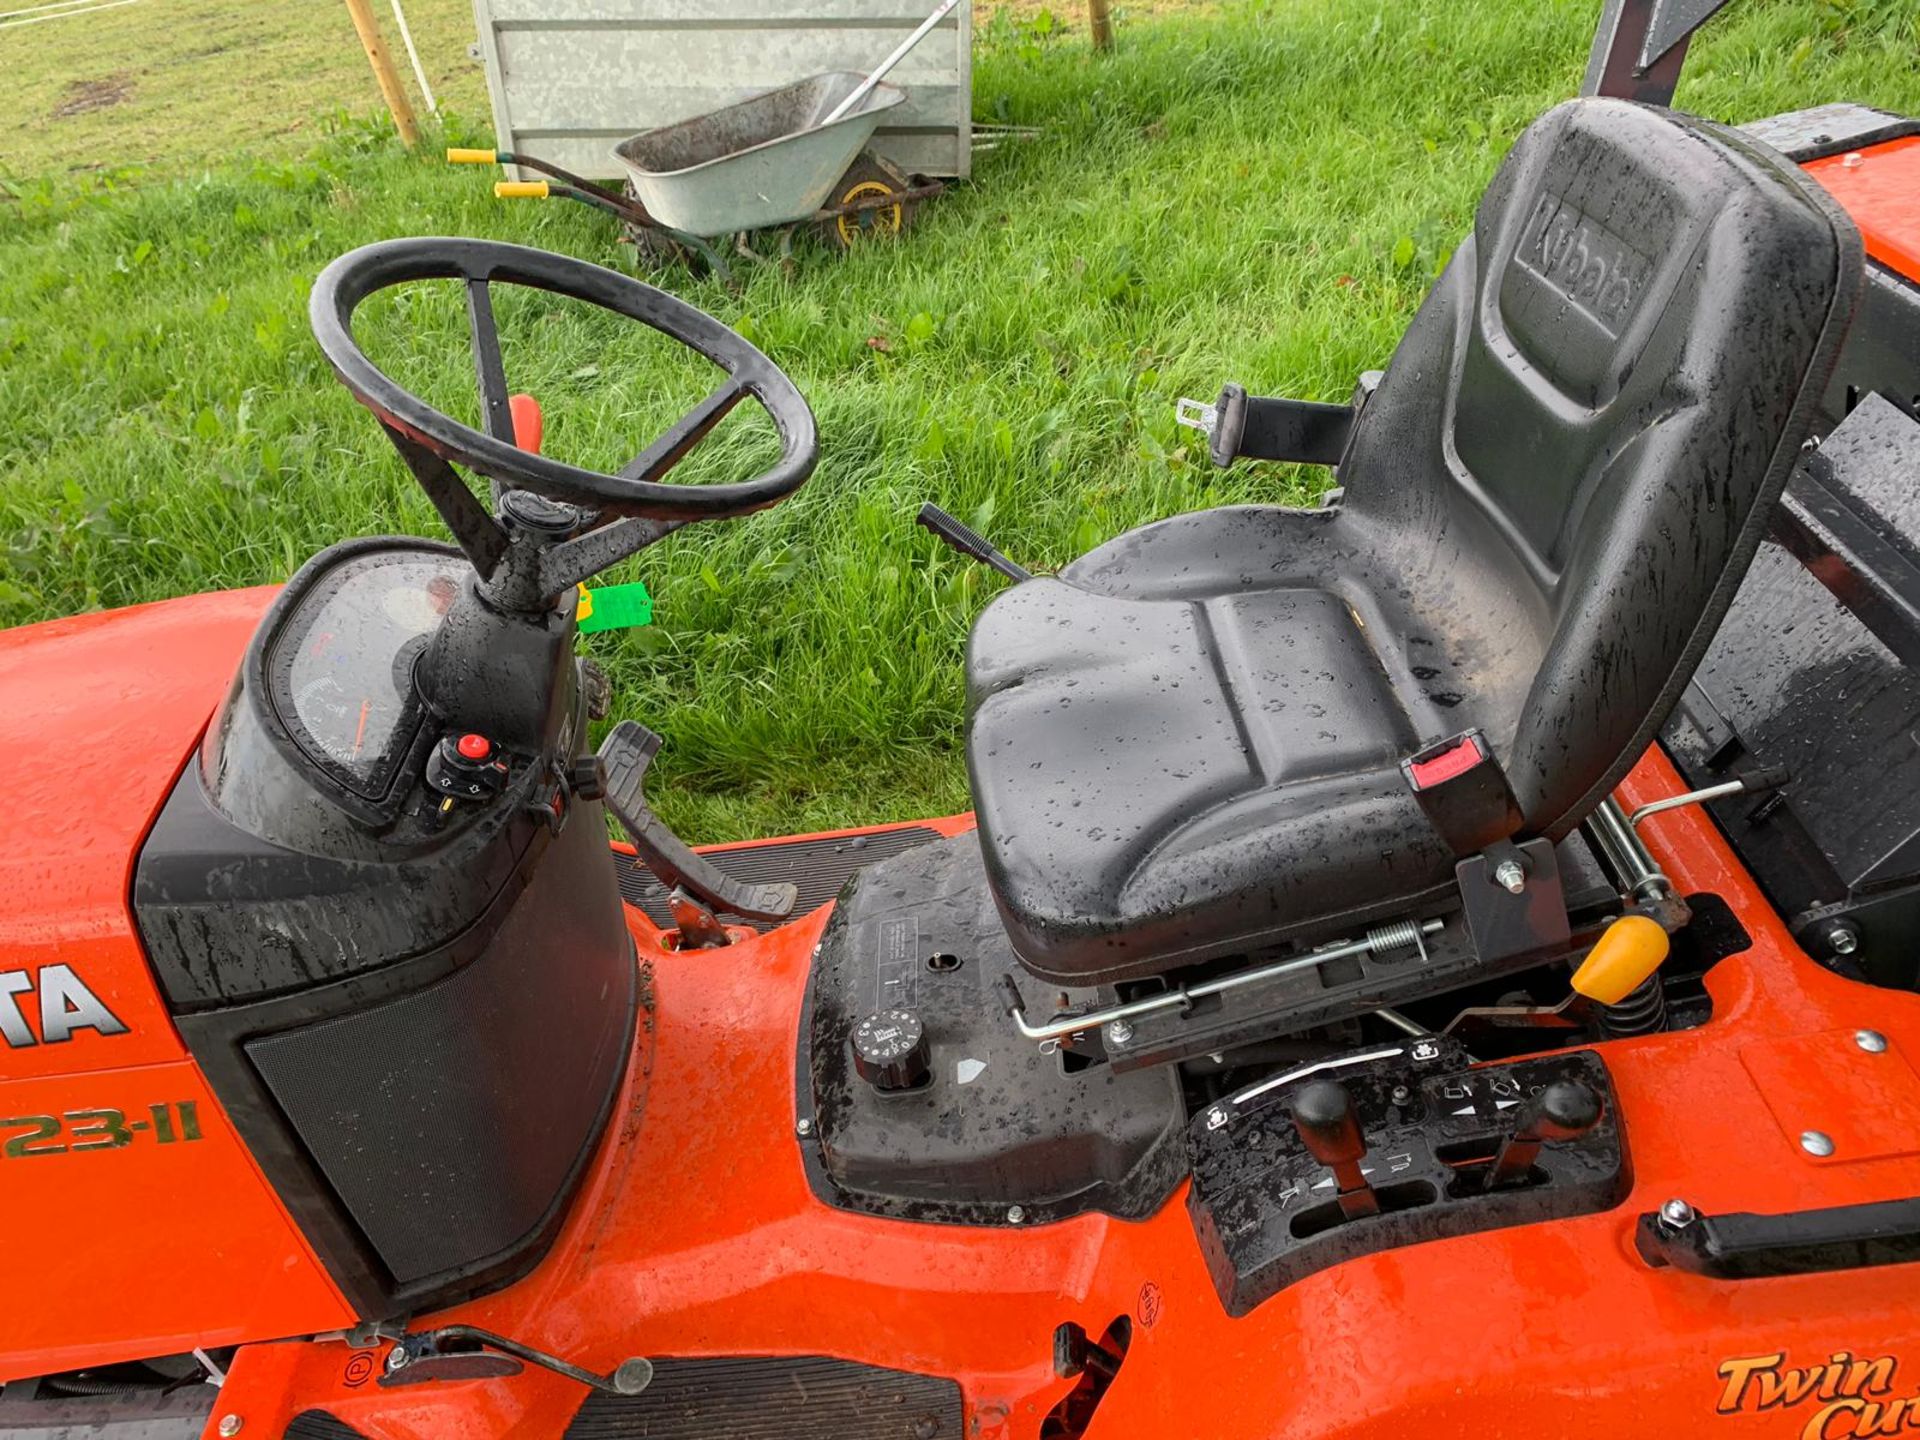 2015 KUBOTA G23-II TWIN CUT LAWN MOWER WITH ROLL BAR, HYDRAULIC TIP, LOW DUMP COLLECTOR - 28 HOURS!! - Image 13 of 15